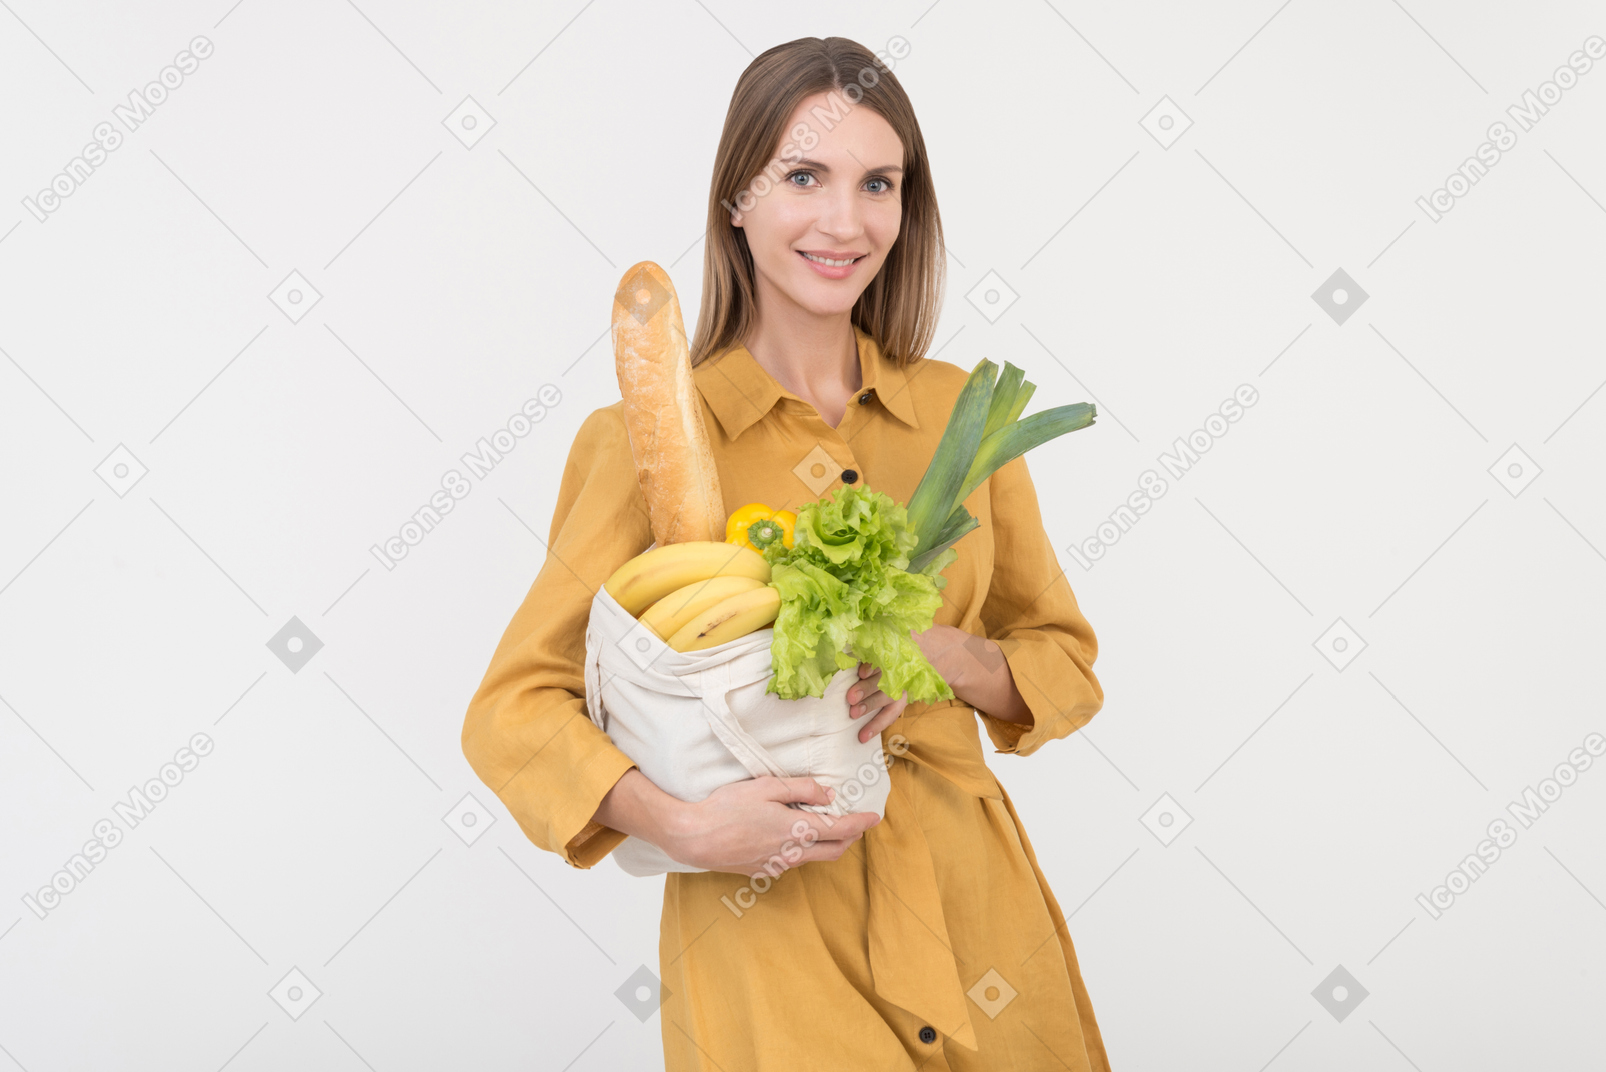 Young woman holding reusabel shopping bag with vegetables